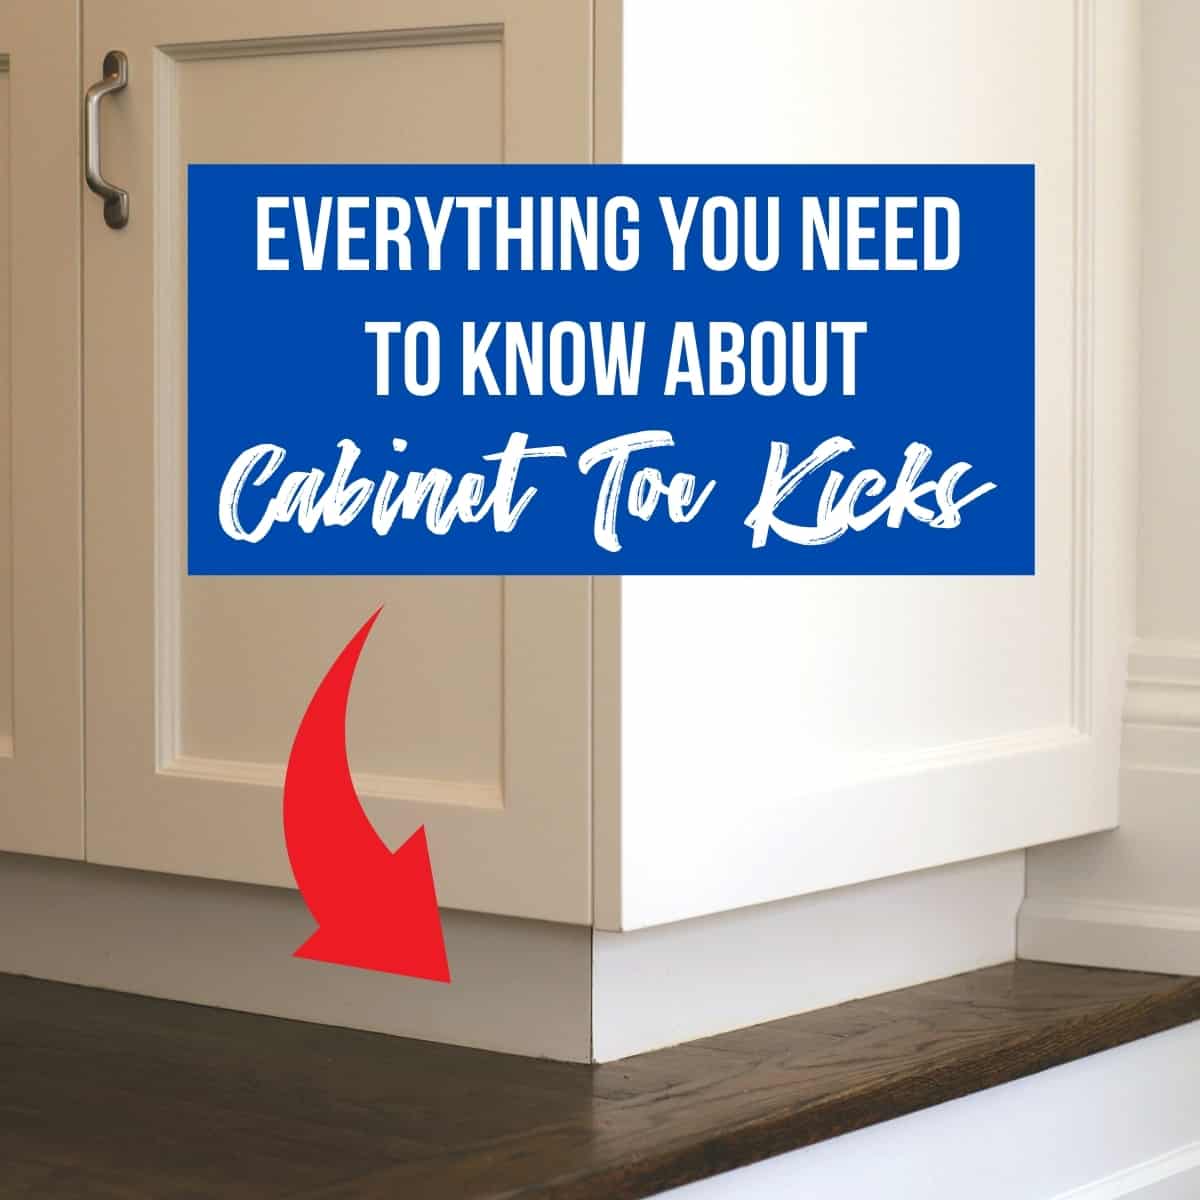 What to Use for Cabinet Toe Kick